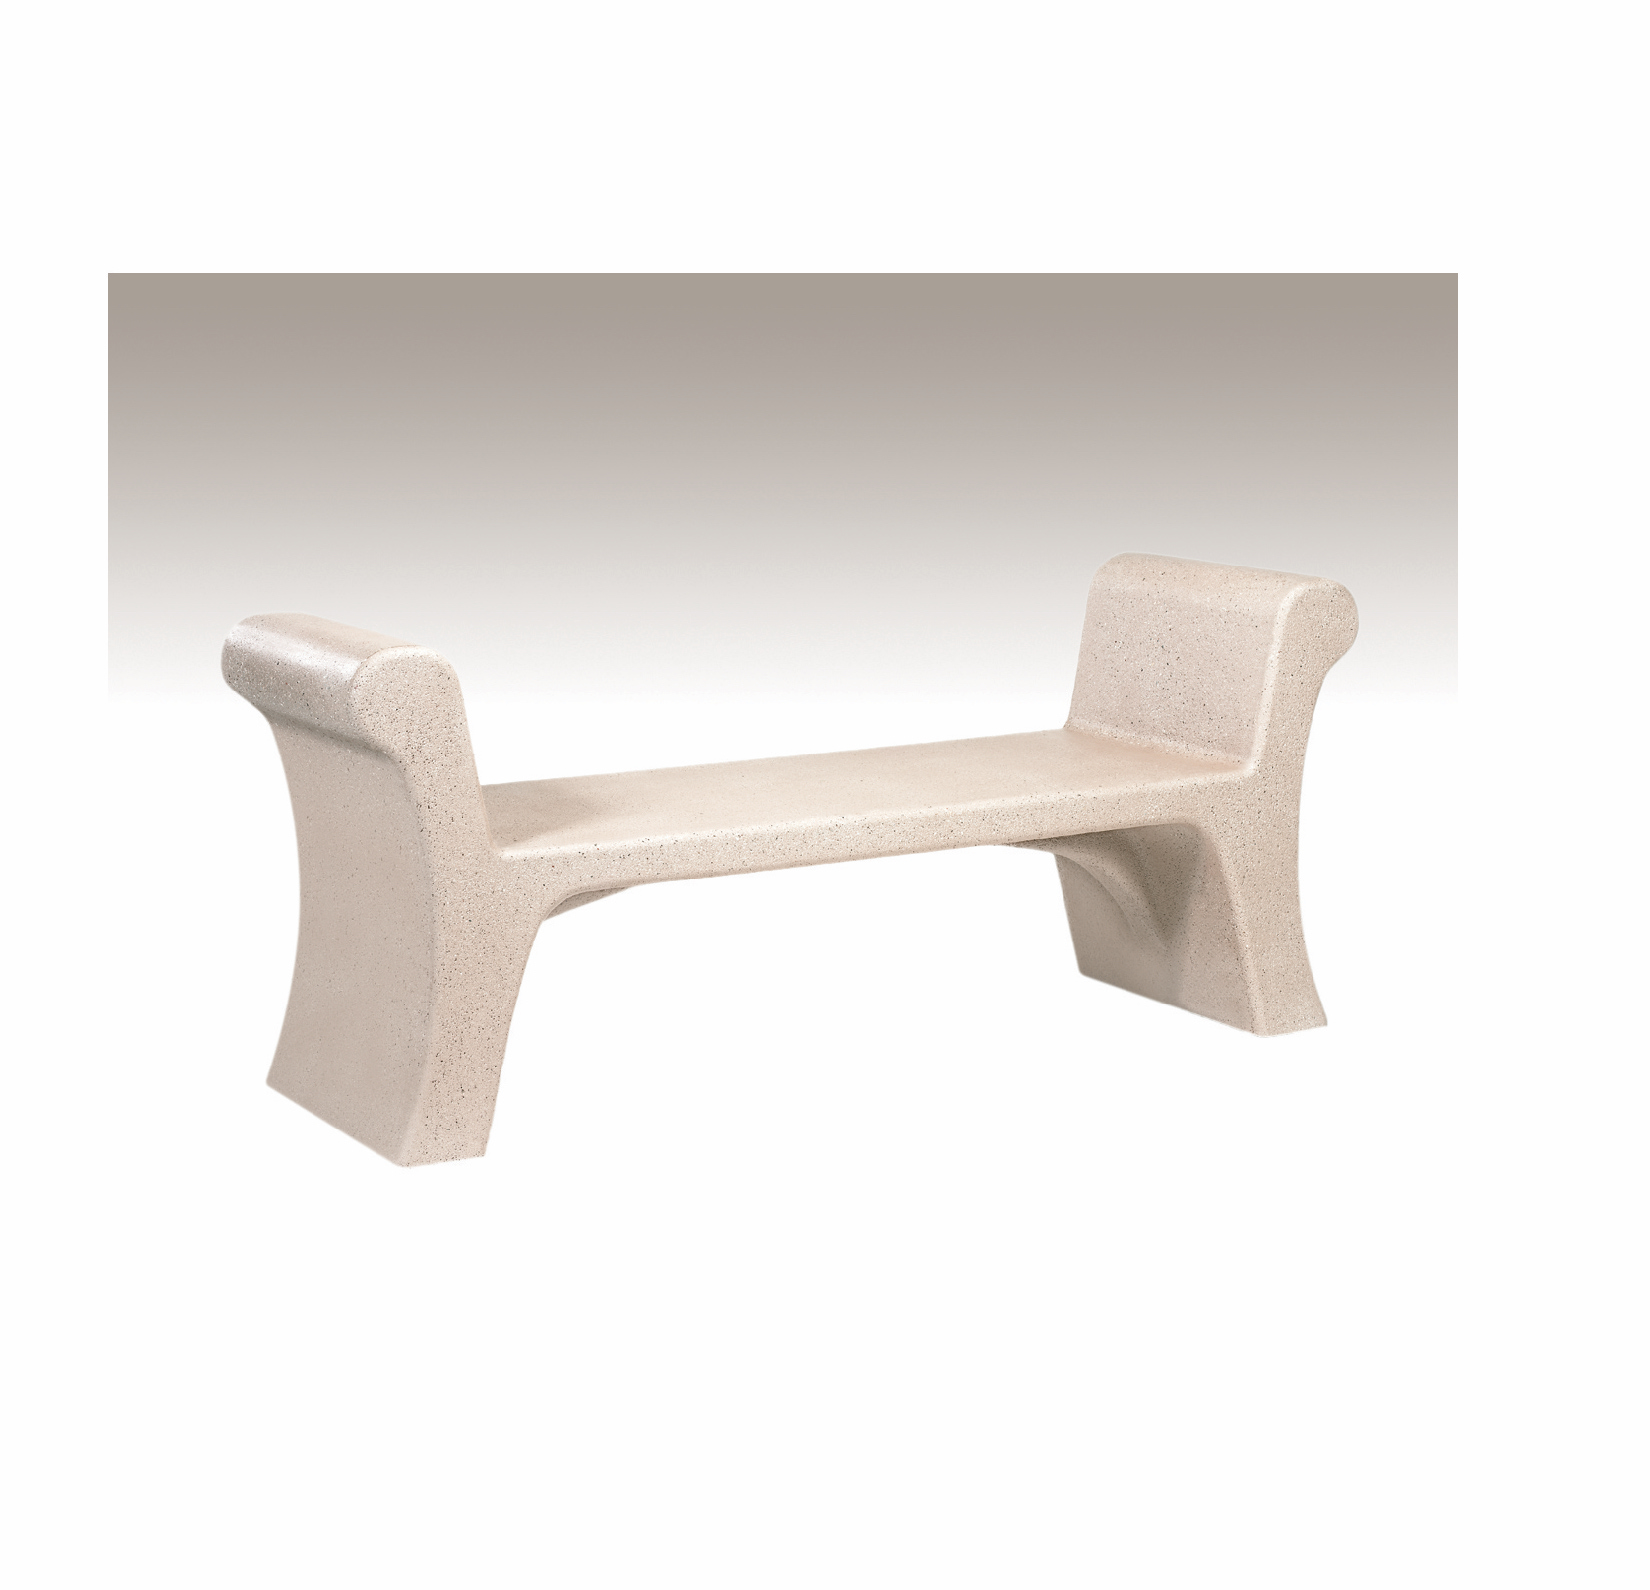 Product Image - Benches